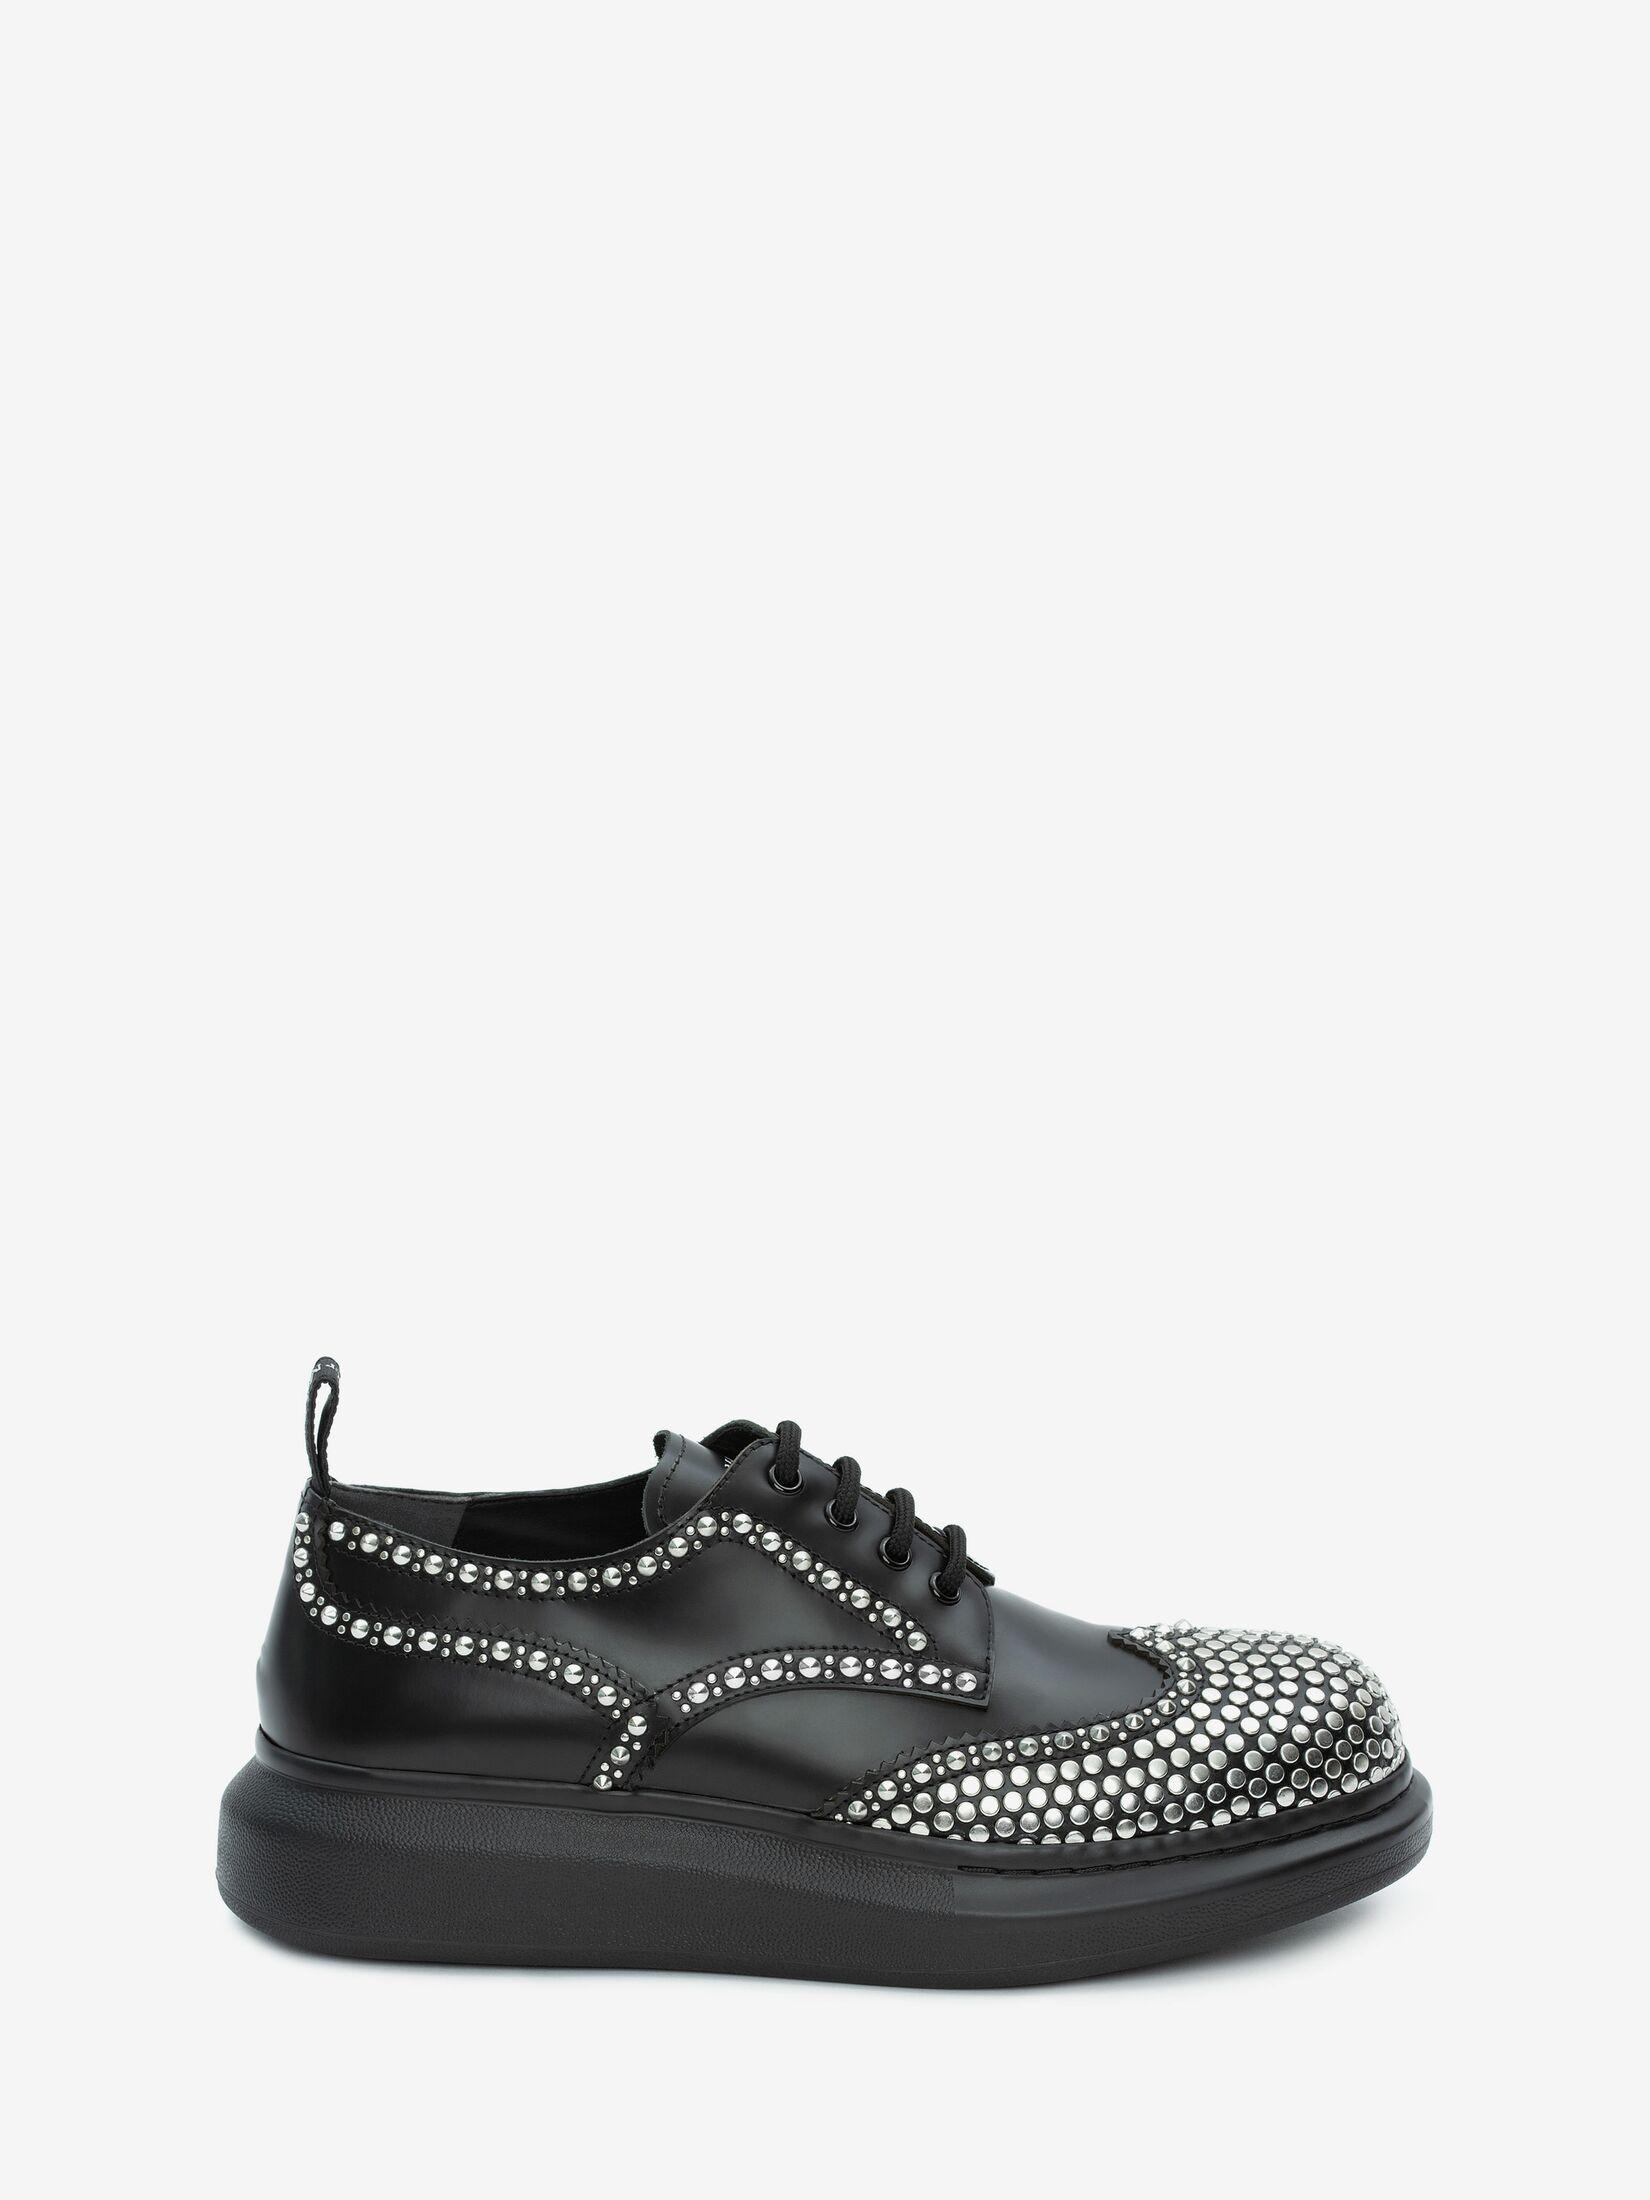 Alexander McQueen Leather Black Hybrid Lace-up for Men - Lyst